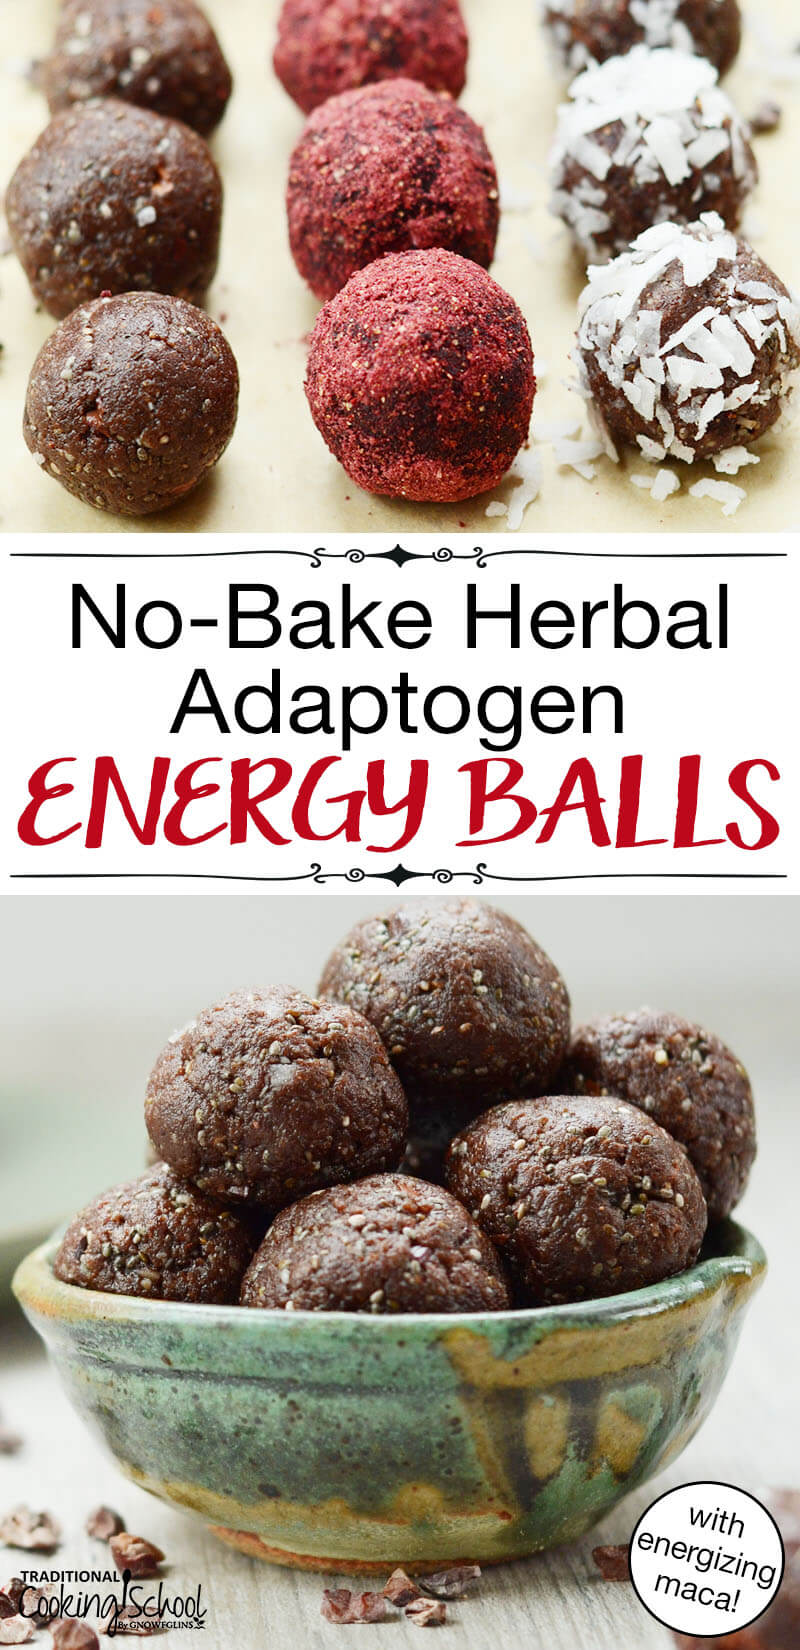 photo collage of no bake balls, some plain in a bowl, others coated in berry powder and shredded coconut, with text overlay: "No-Bake Herbal Adaptogen Energy Balls (with energizing maca!)"